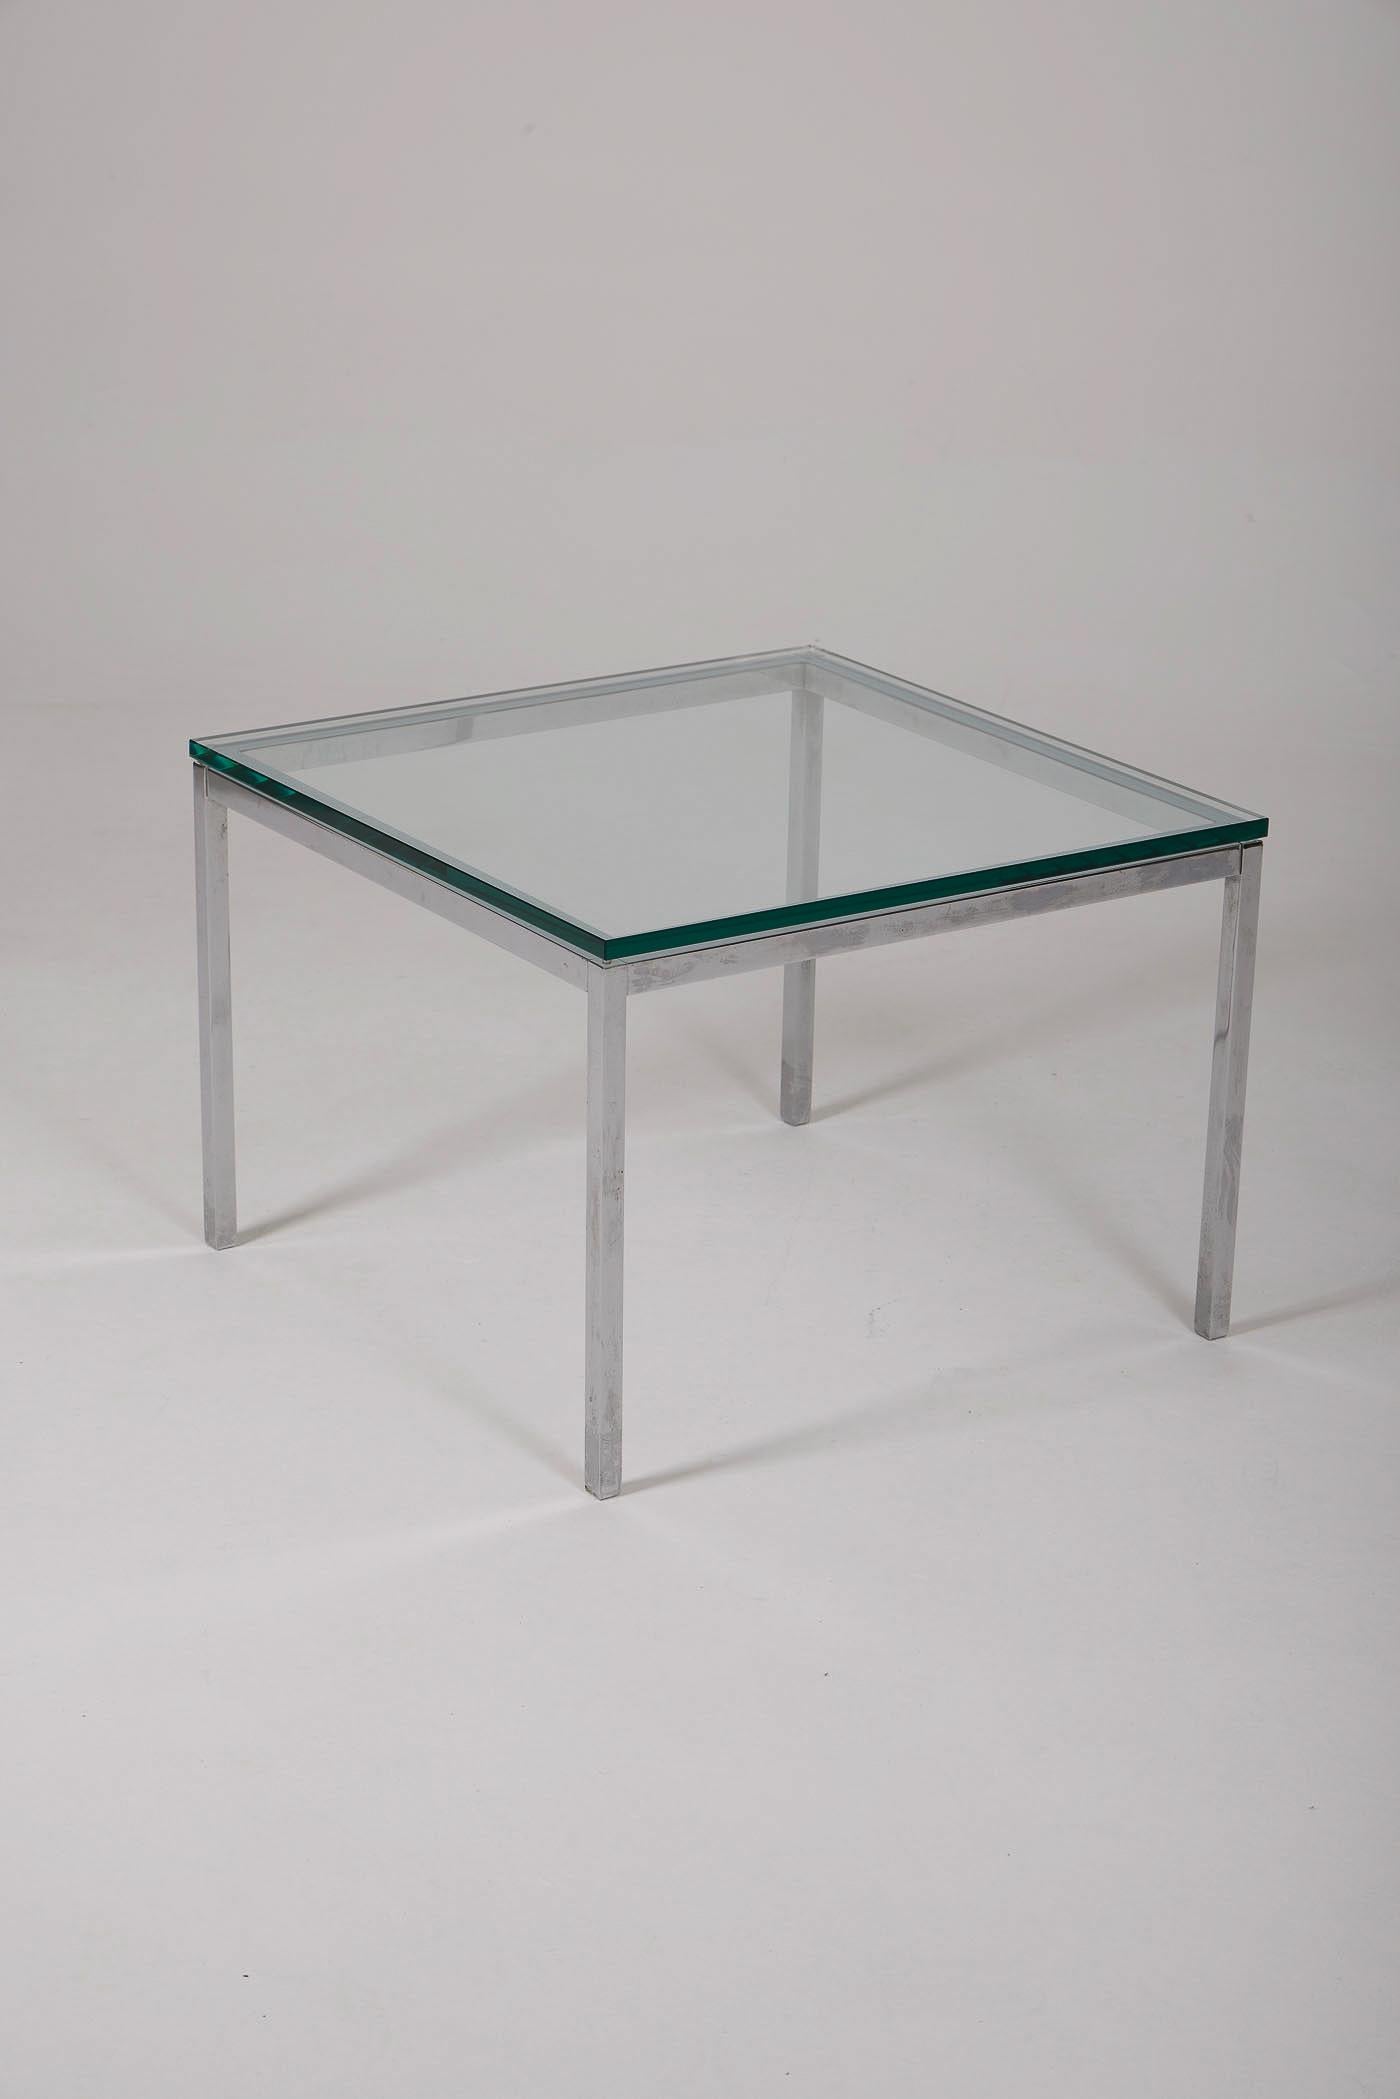 Coffee table by designer Florence Knoll for Knoll International, from the 1970s. The structure is welded and chromed steel. The tabletop is made of thick glass. 2 tables available. Very good condition.
DV433